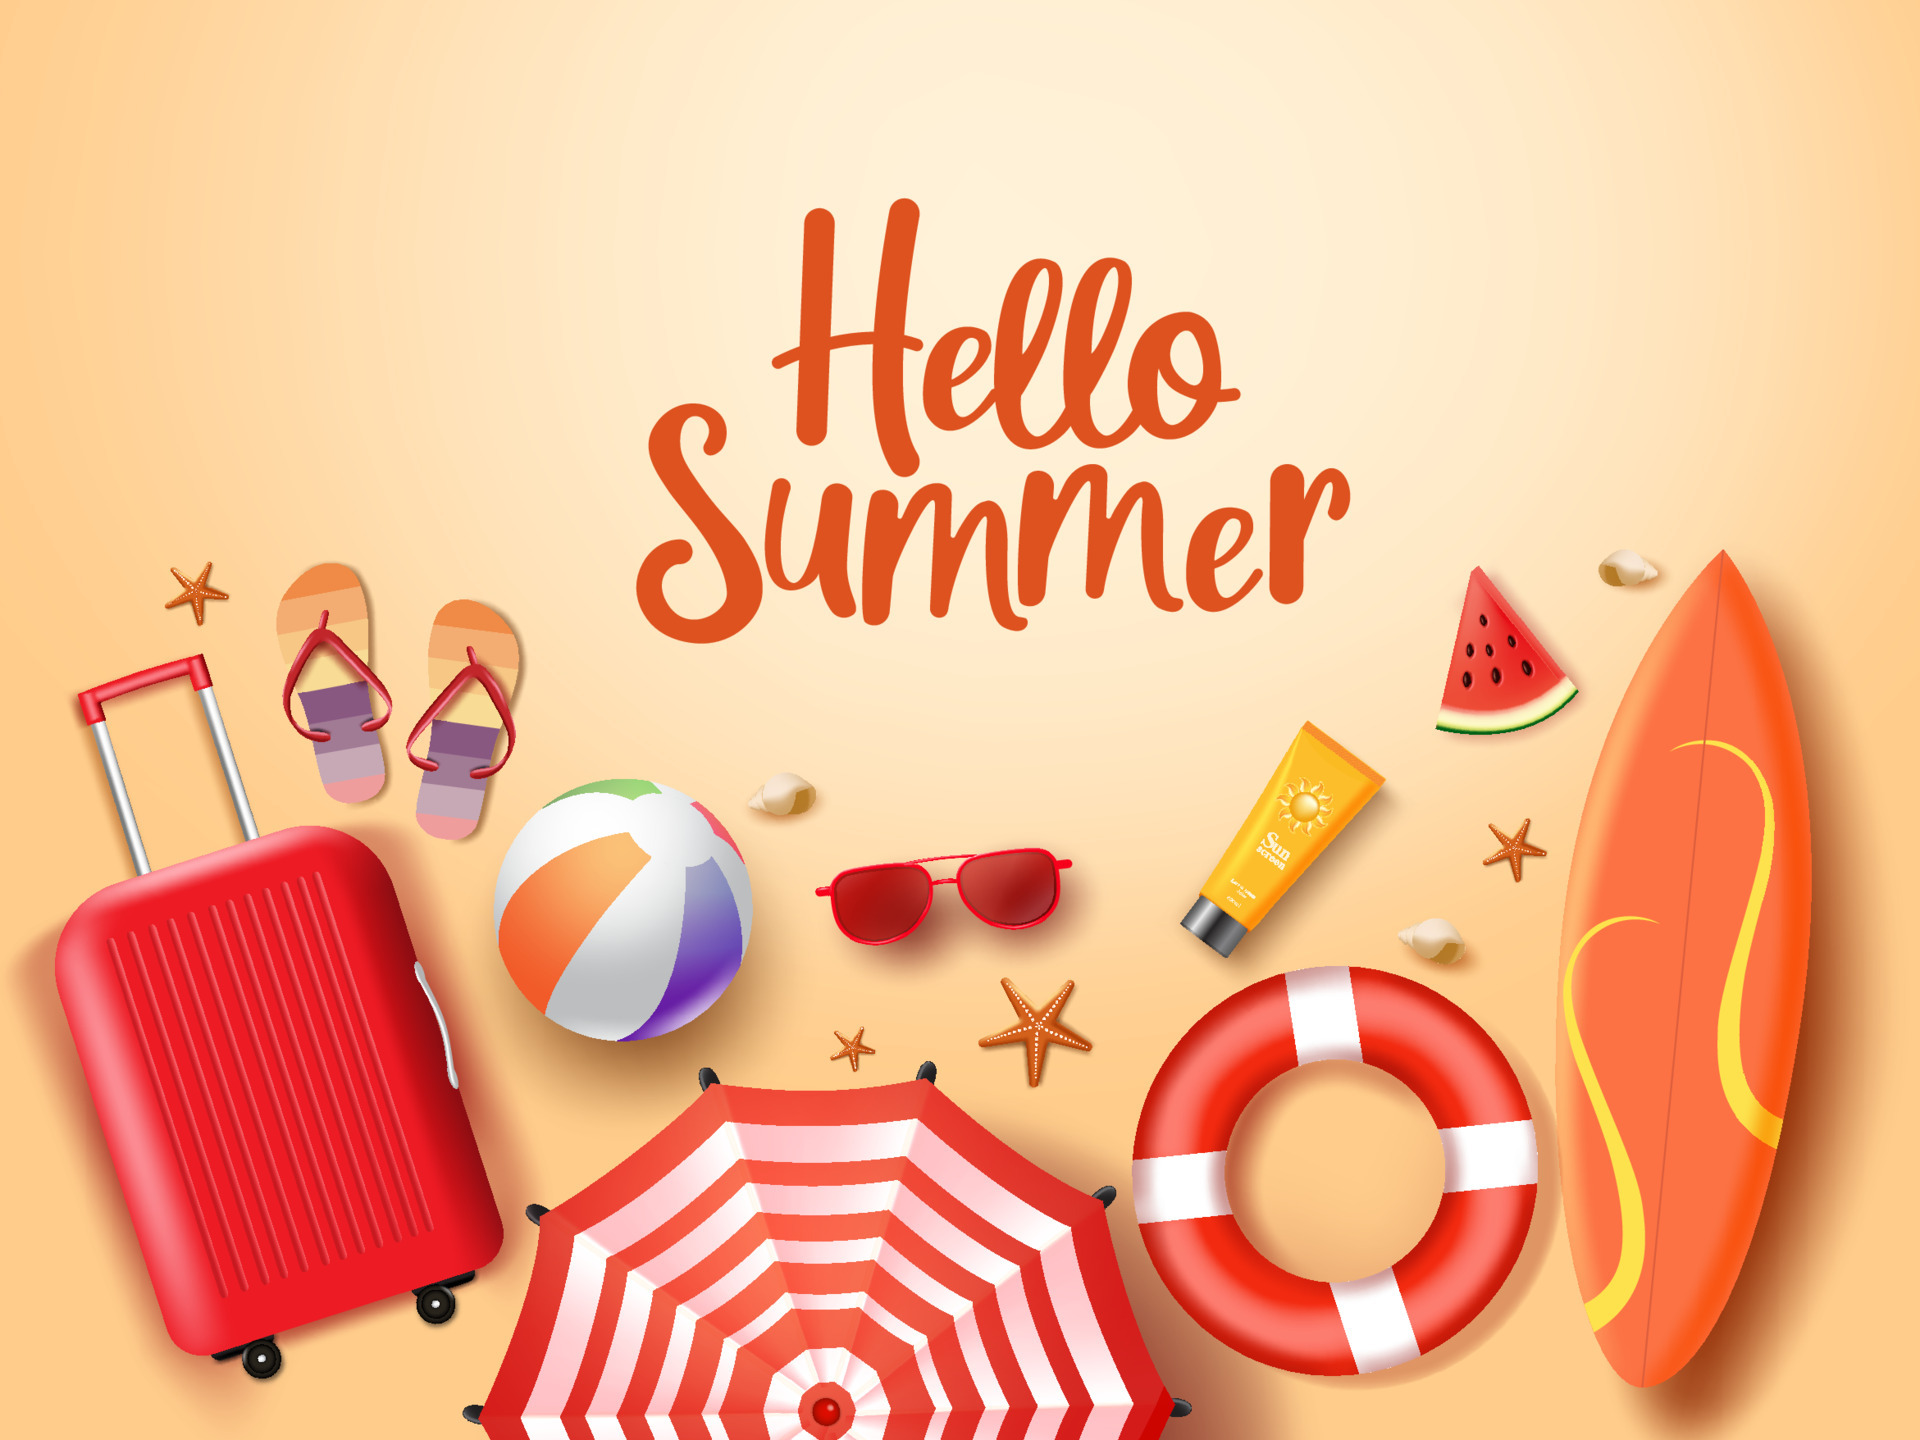 Hello summer vector background design. Hello summer greeting text in sand with beach element of watermelon, sunglasses, sun screen, beach ball, lifebuoy, umbrella, surfing board, and luggage